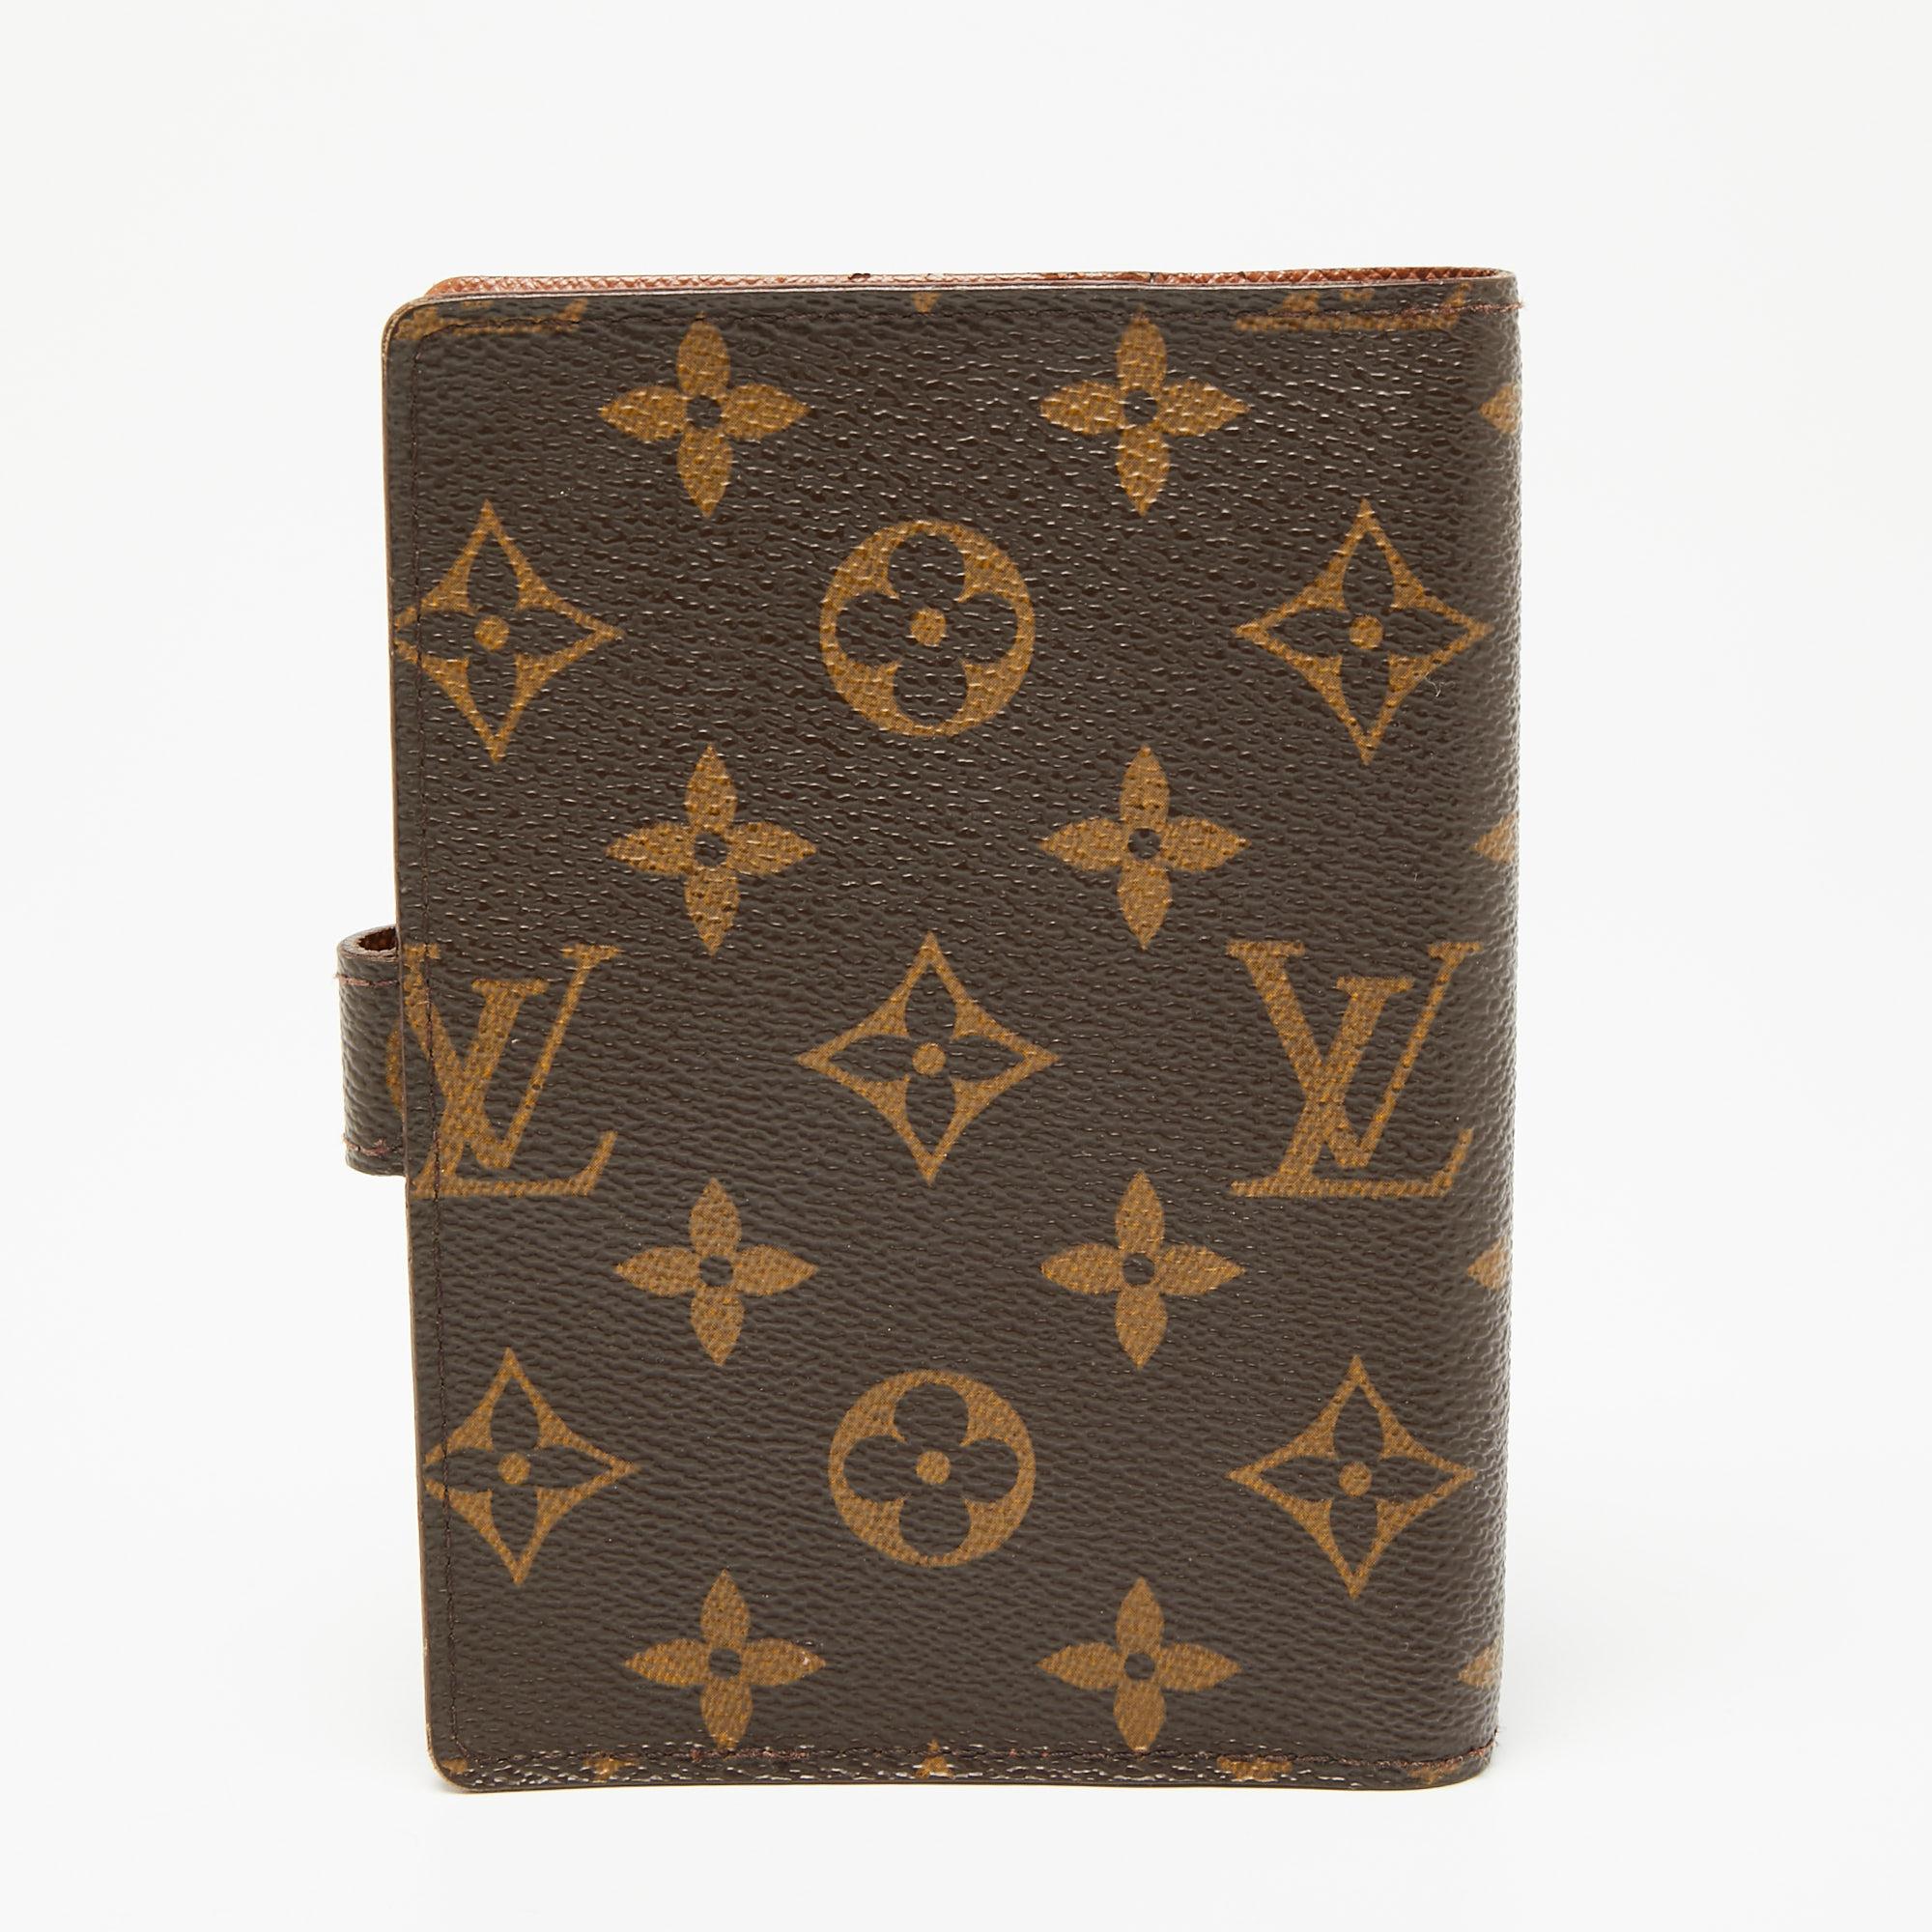 Combining the luxurious touch with utility, this Louis Vuitton agenda cover comes crafted from coated canvas in brown. It is designed with a snap button closure and an interior housing space for papers and slots for cards.

